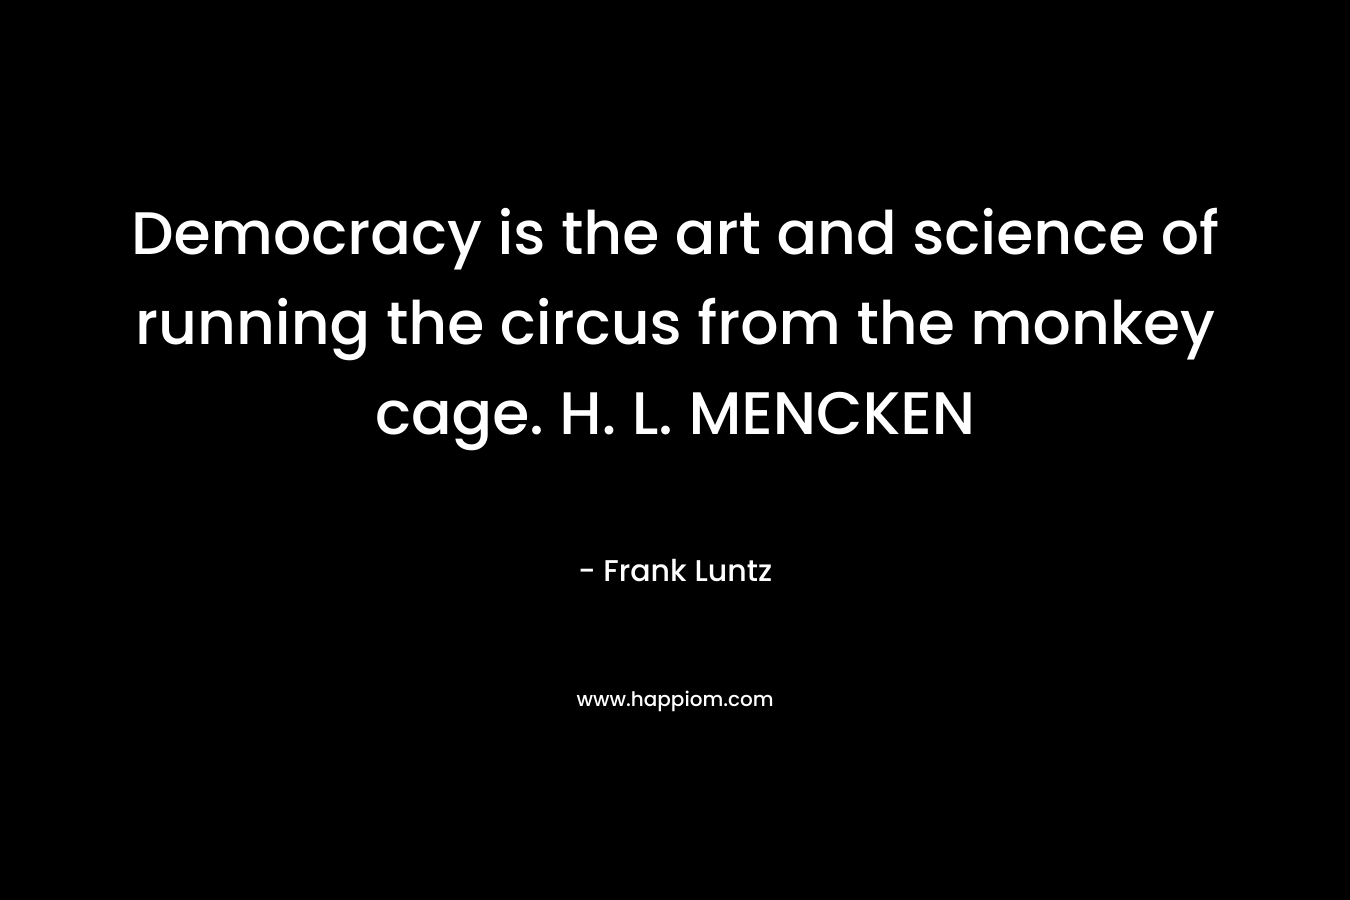 Democracy is the art and science of running the circus from the monkey cage. H. L. MENCKEN